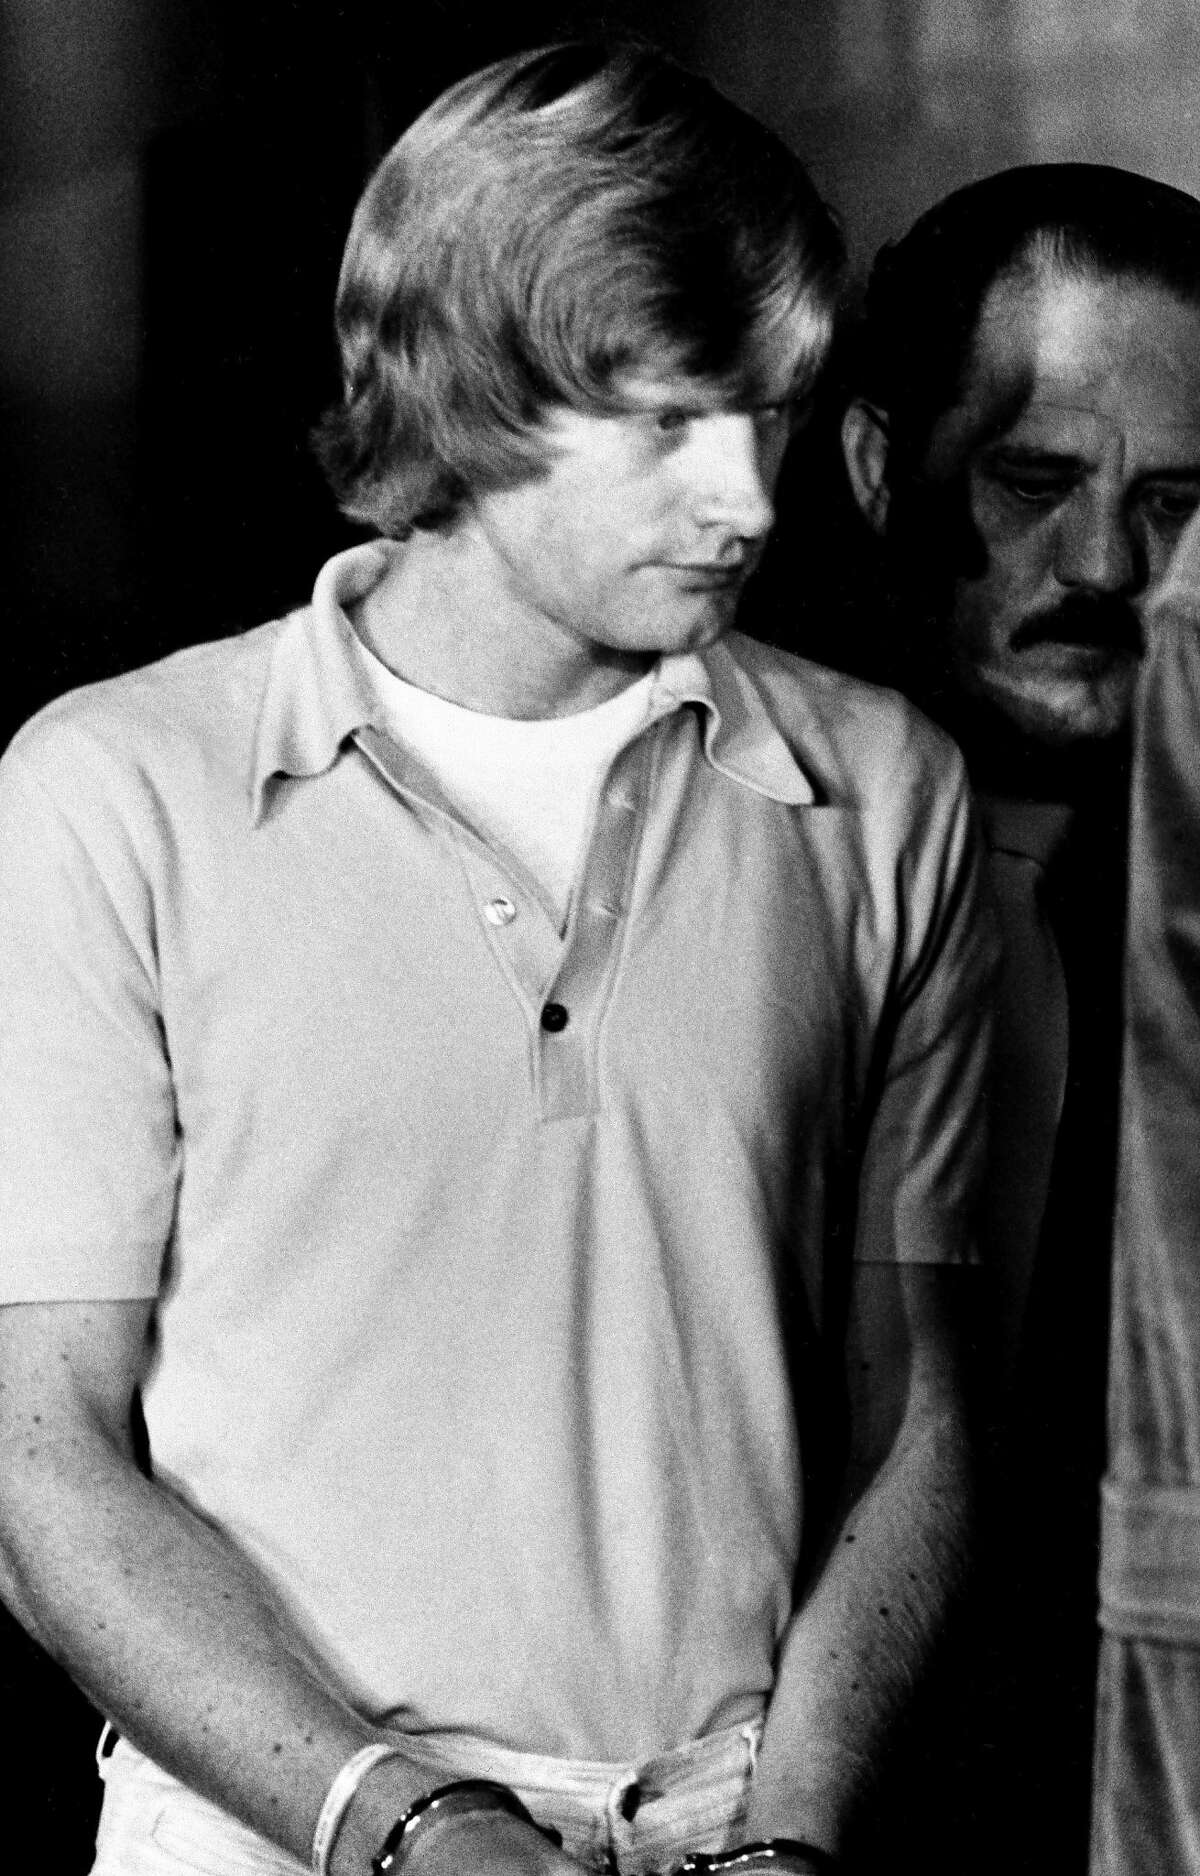 FILE - In this July 29, 1976 file photo, Richard Schoenfeld leaves the Alameda County Jail in Oakland, Calif. Schoenfeld, his brother James Schoenfeld and Frederick N. Woods are up for parole again and this time, they have the support of the judge, prosecutors and investigators who handled their notorious case. The trio was convicted of abducting 26 children and their bus driver and hiding them underground in a rock quarry. The victims managed to escape after 36 hours, and none were seriously injured.